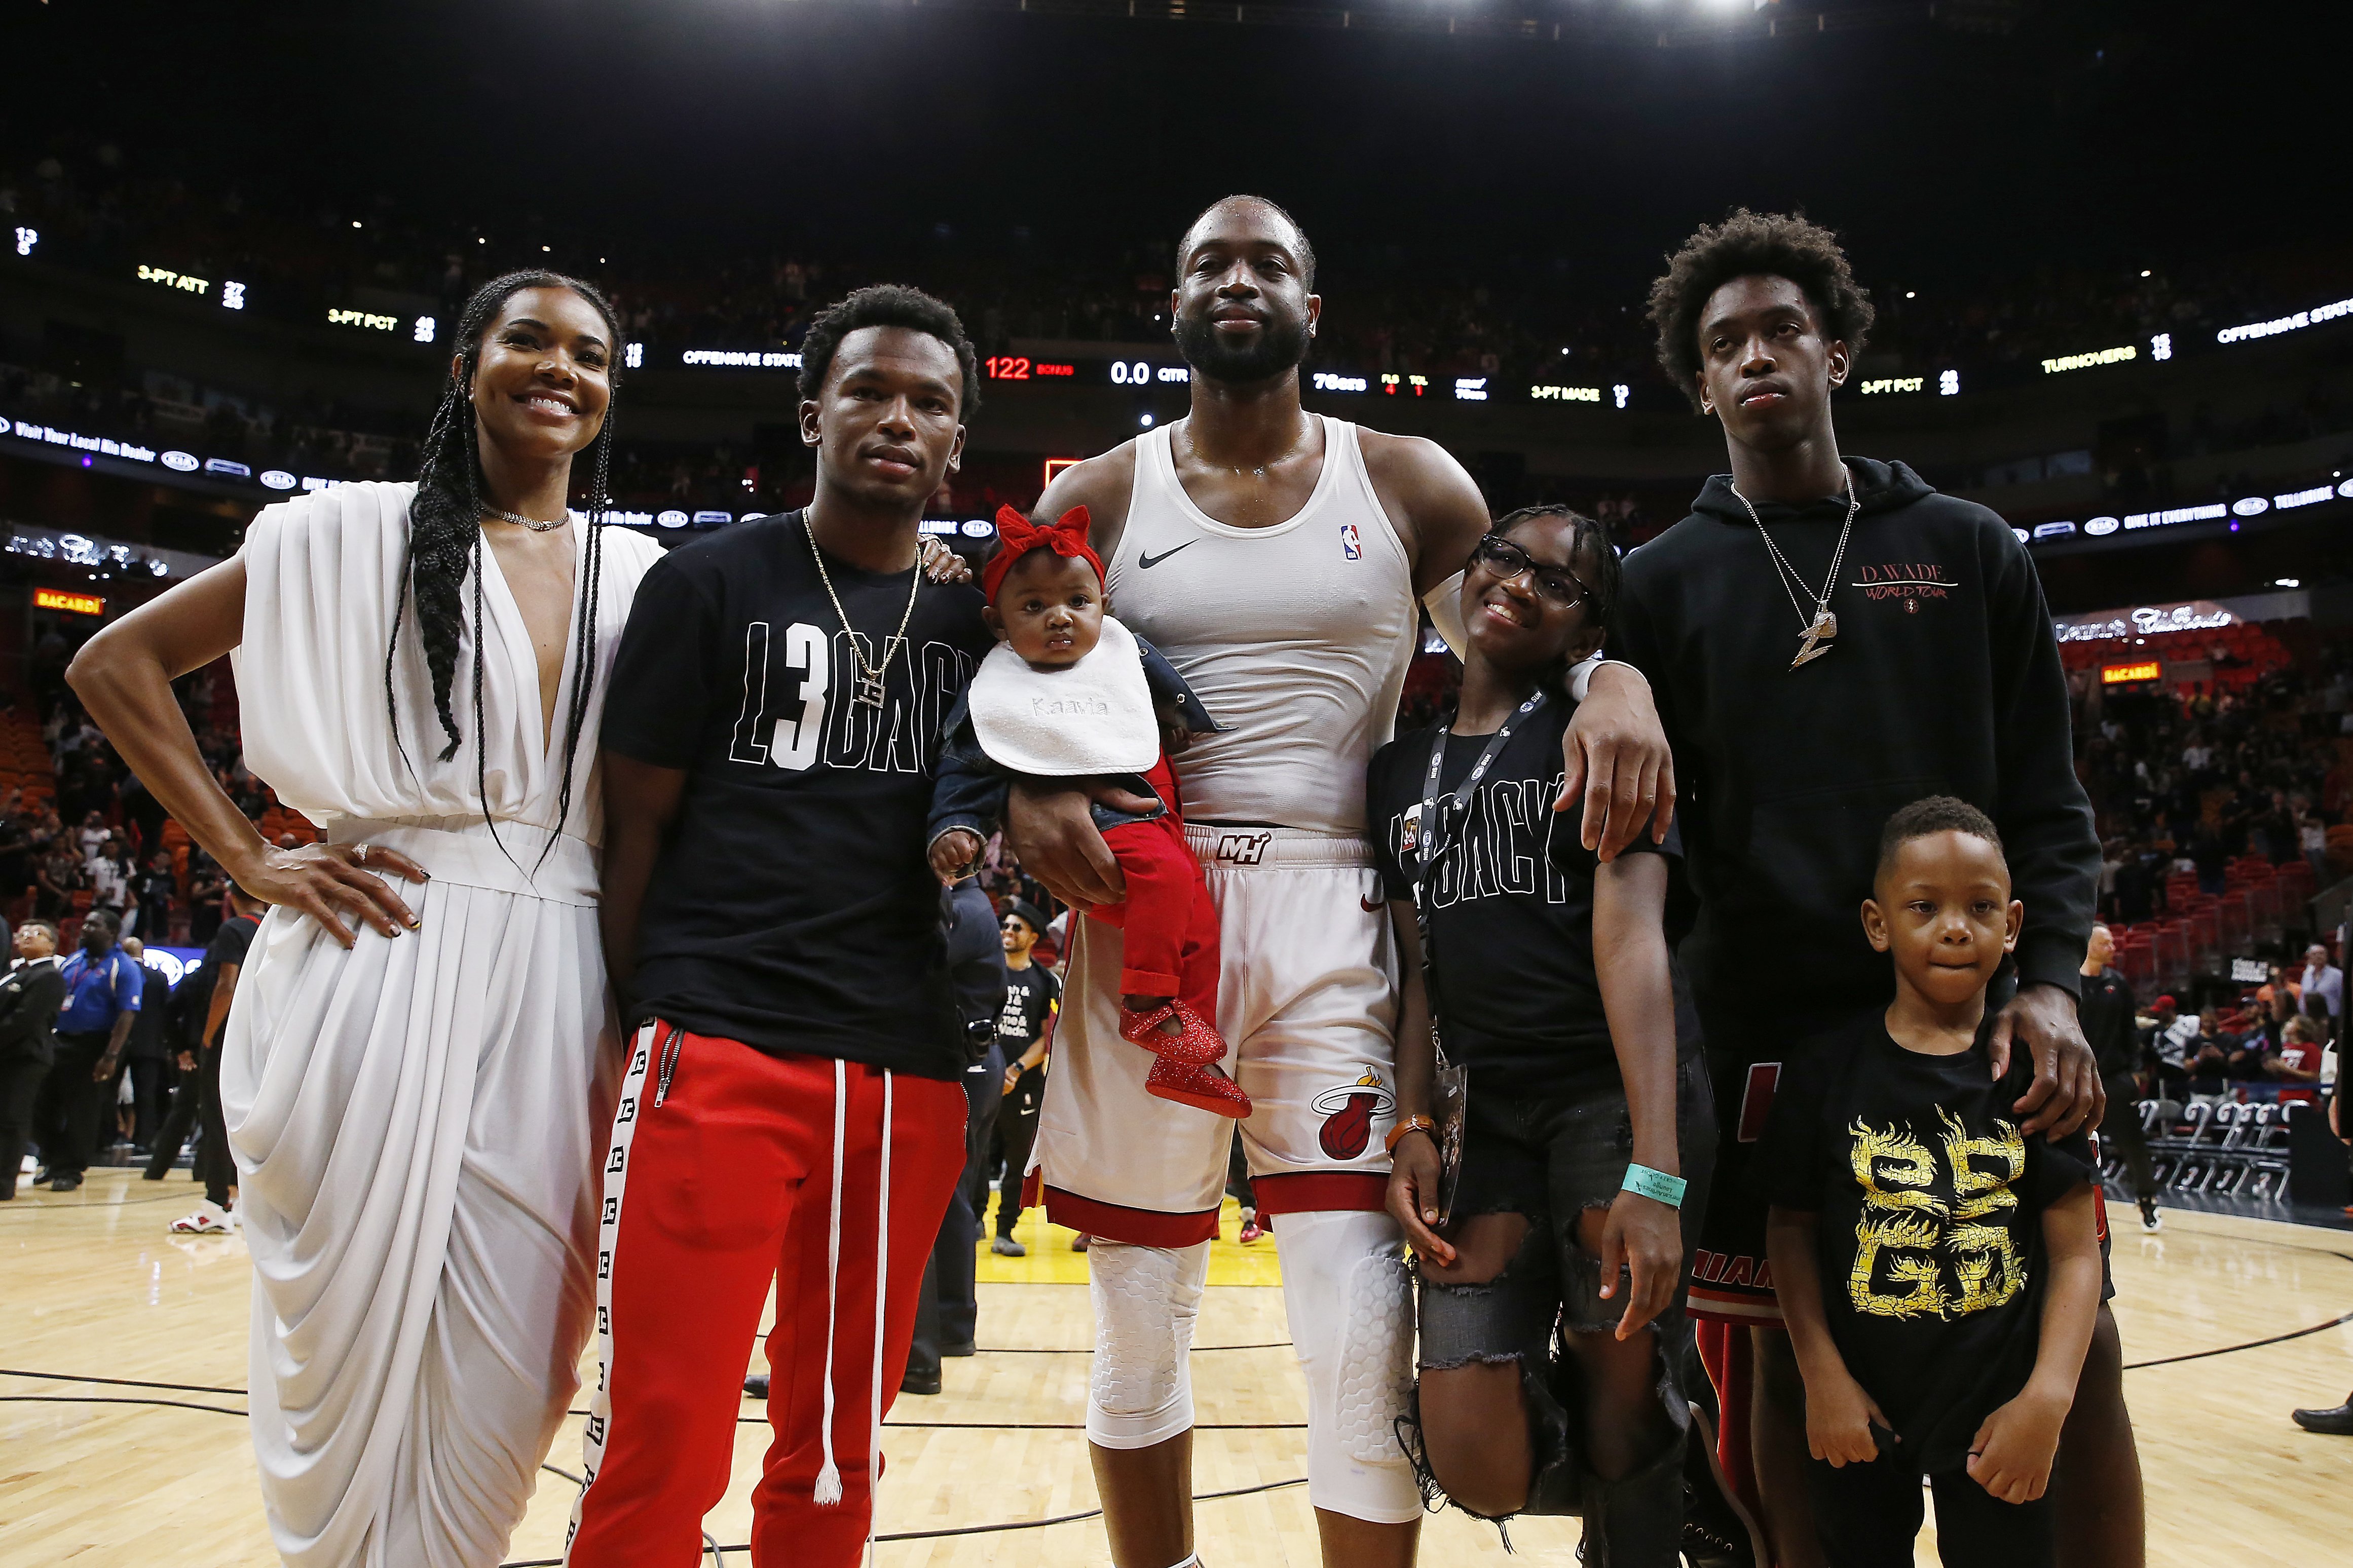 Dwayne Wade (center) with (L-R) wife Gabrielle Union, his nephew Dahveon Morris, and children Kaavia , Zion, Zaire & Xavier at Dwyane’s final home game in Miami on Apr.09, 2019. |Photo: Getty Images.